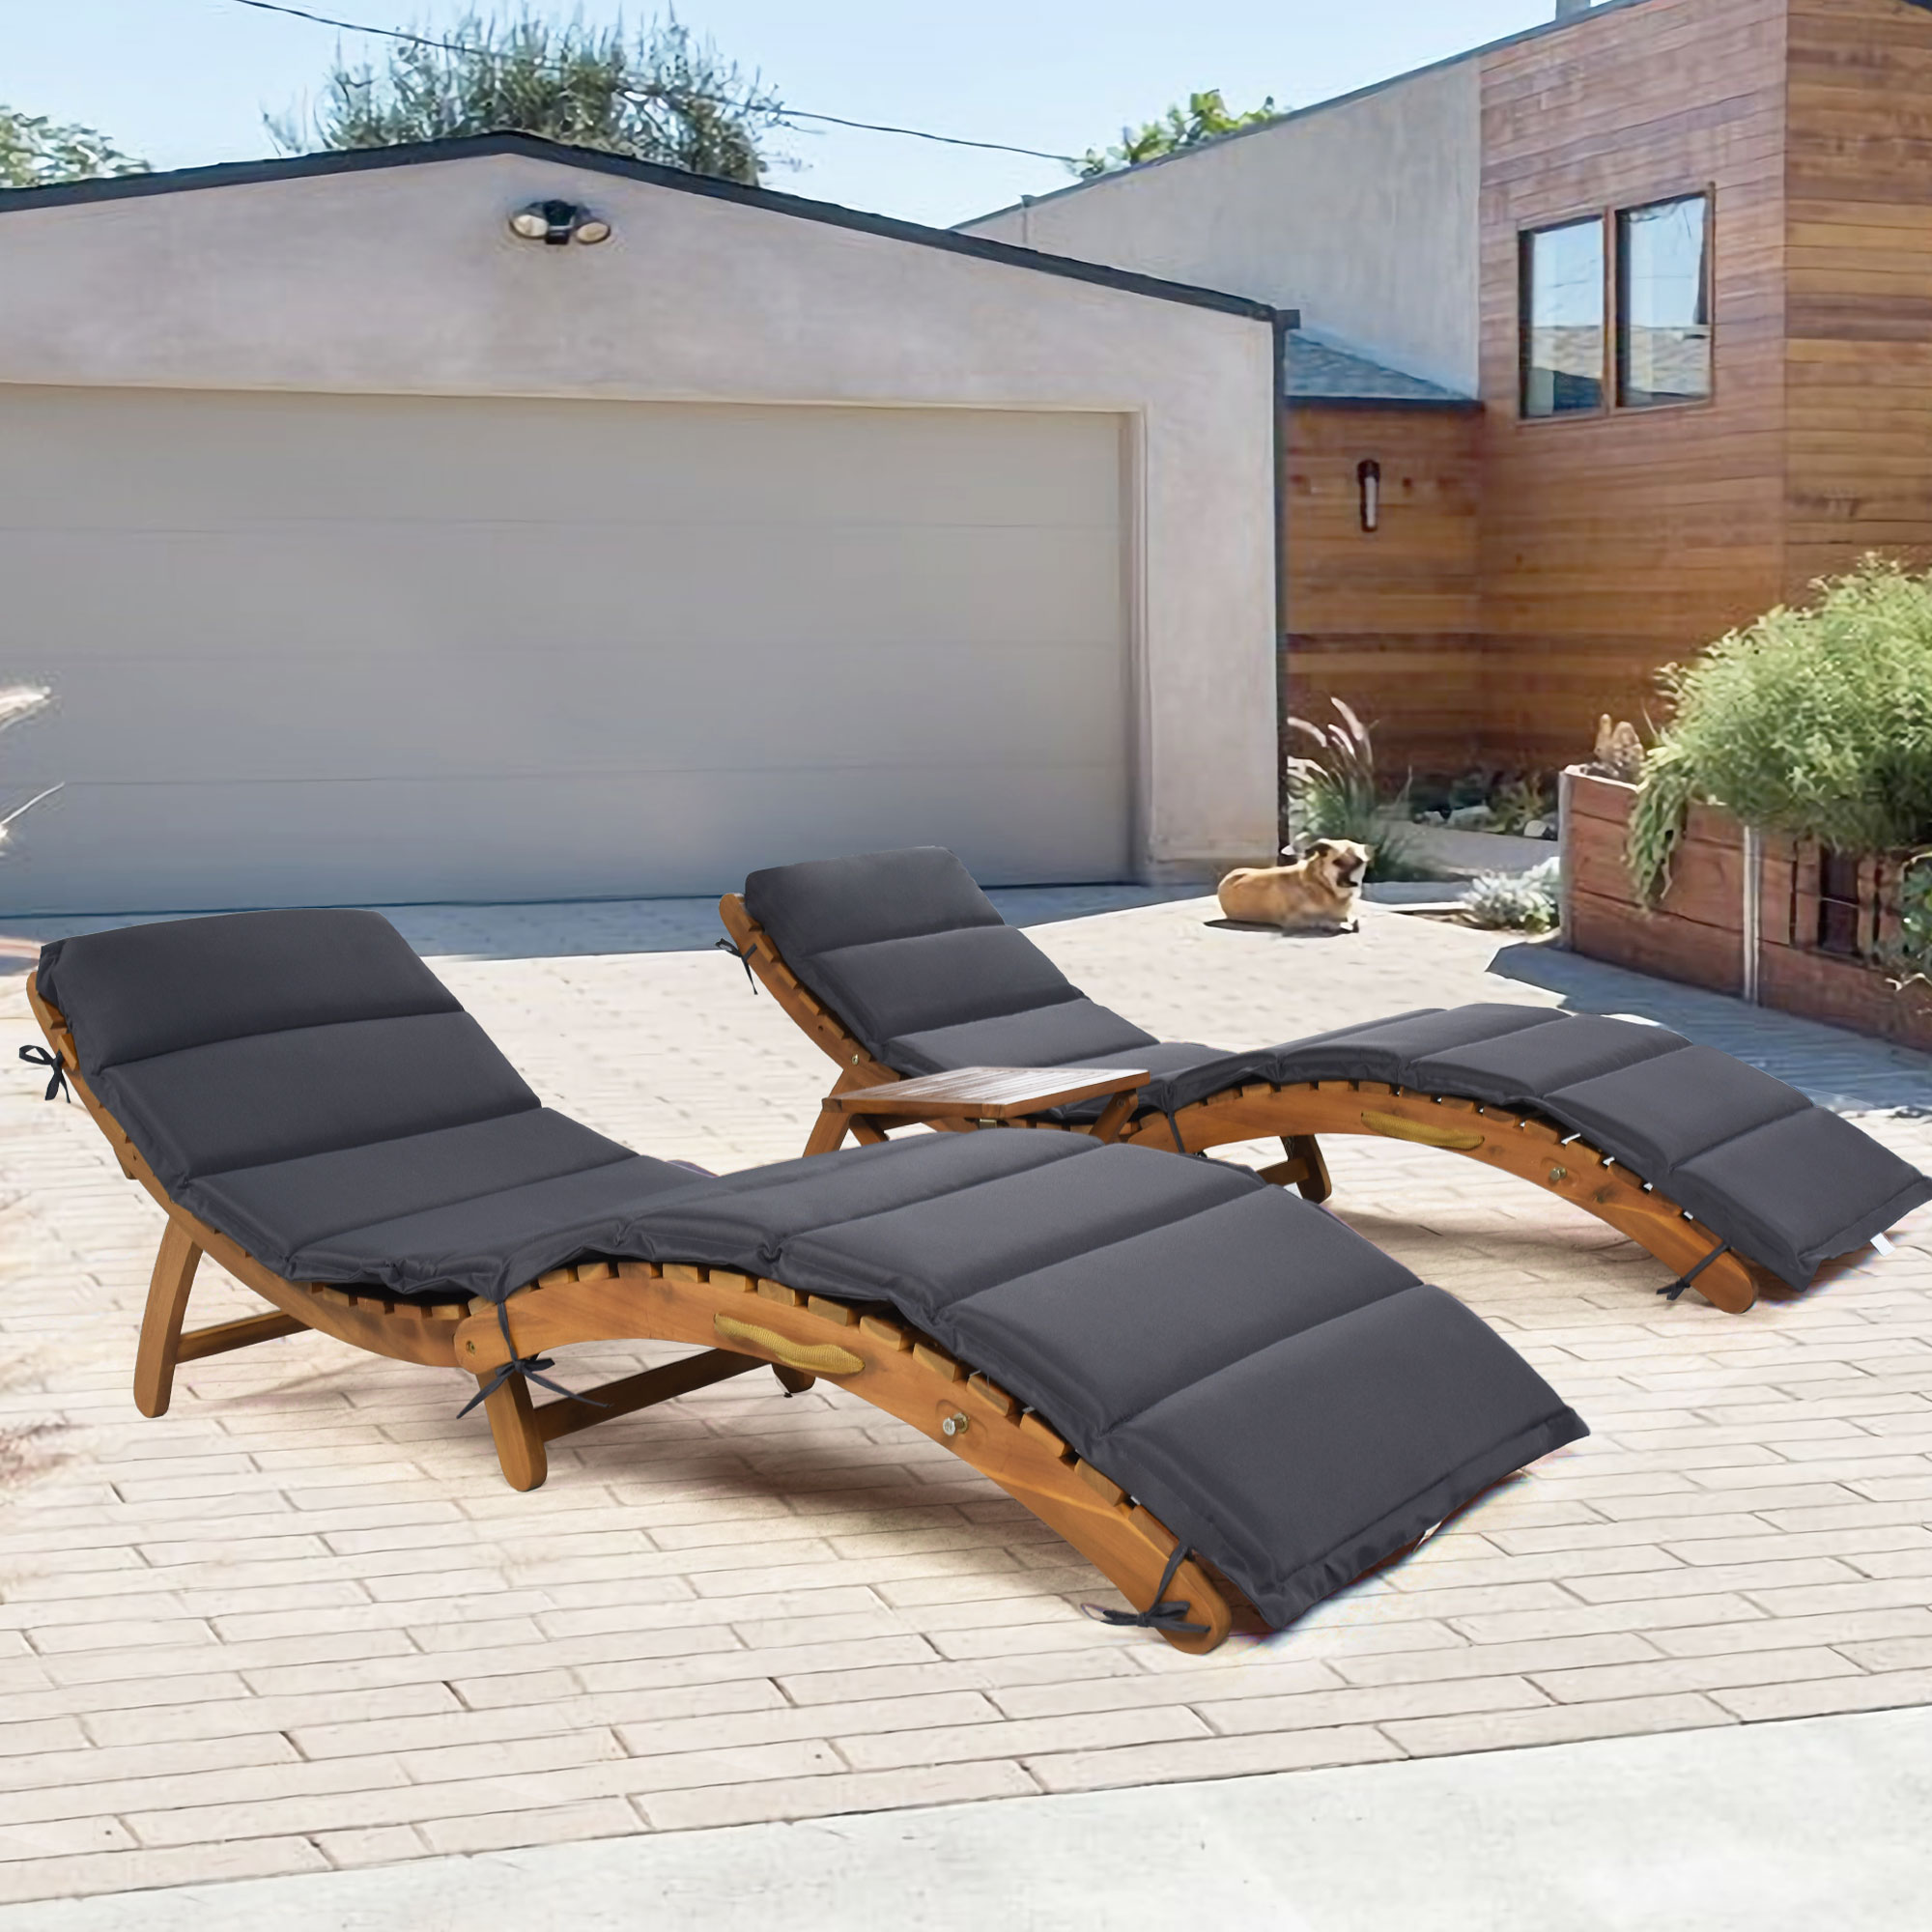 Chaise Lounge Chairs for Outside, SYNGAR 3 Piece Patio Lounge Chaise Chairs Set with Matching Table, Outdoor Extended Sun Loungers with Cushions, Wood Recliner Chairs for Yard, Poolside, Garden, D7434 - image 1 of 12